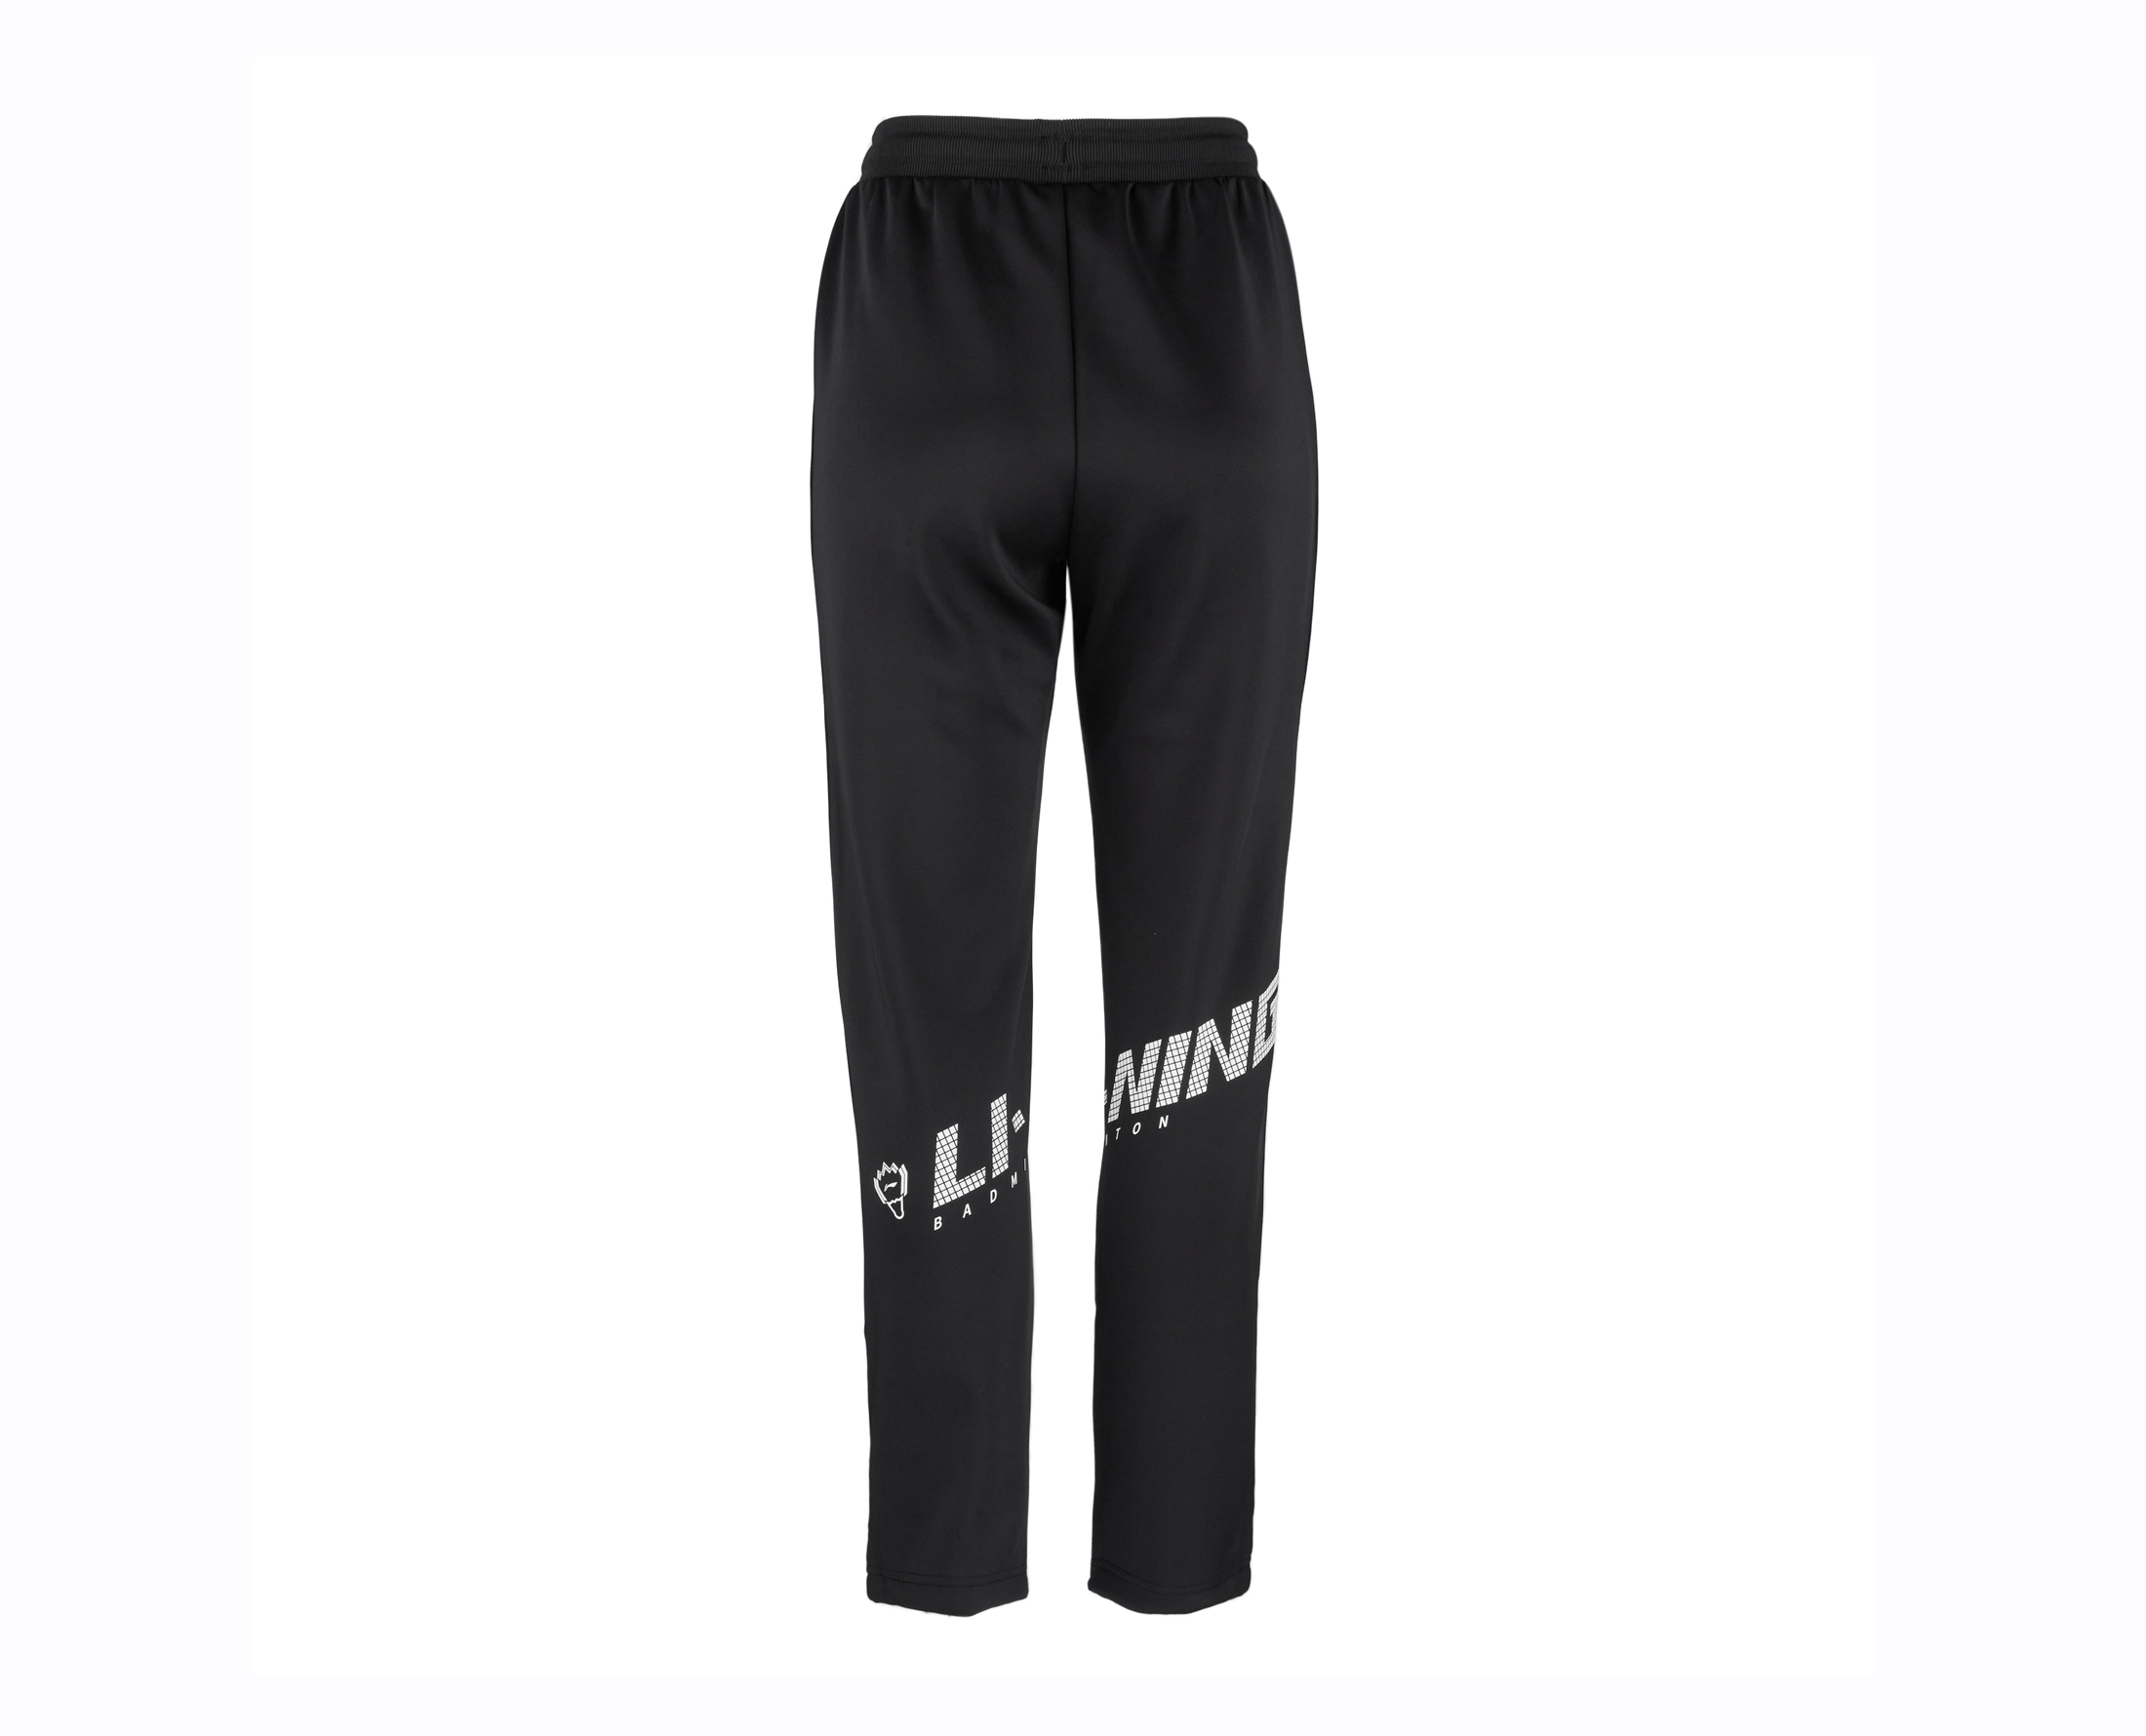 Women's Casual Joggers Pants + FREE SHIPPING, Clothing